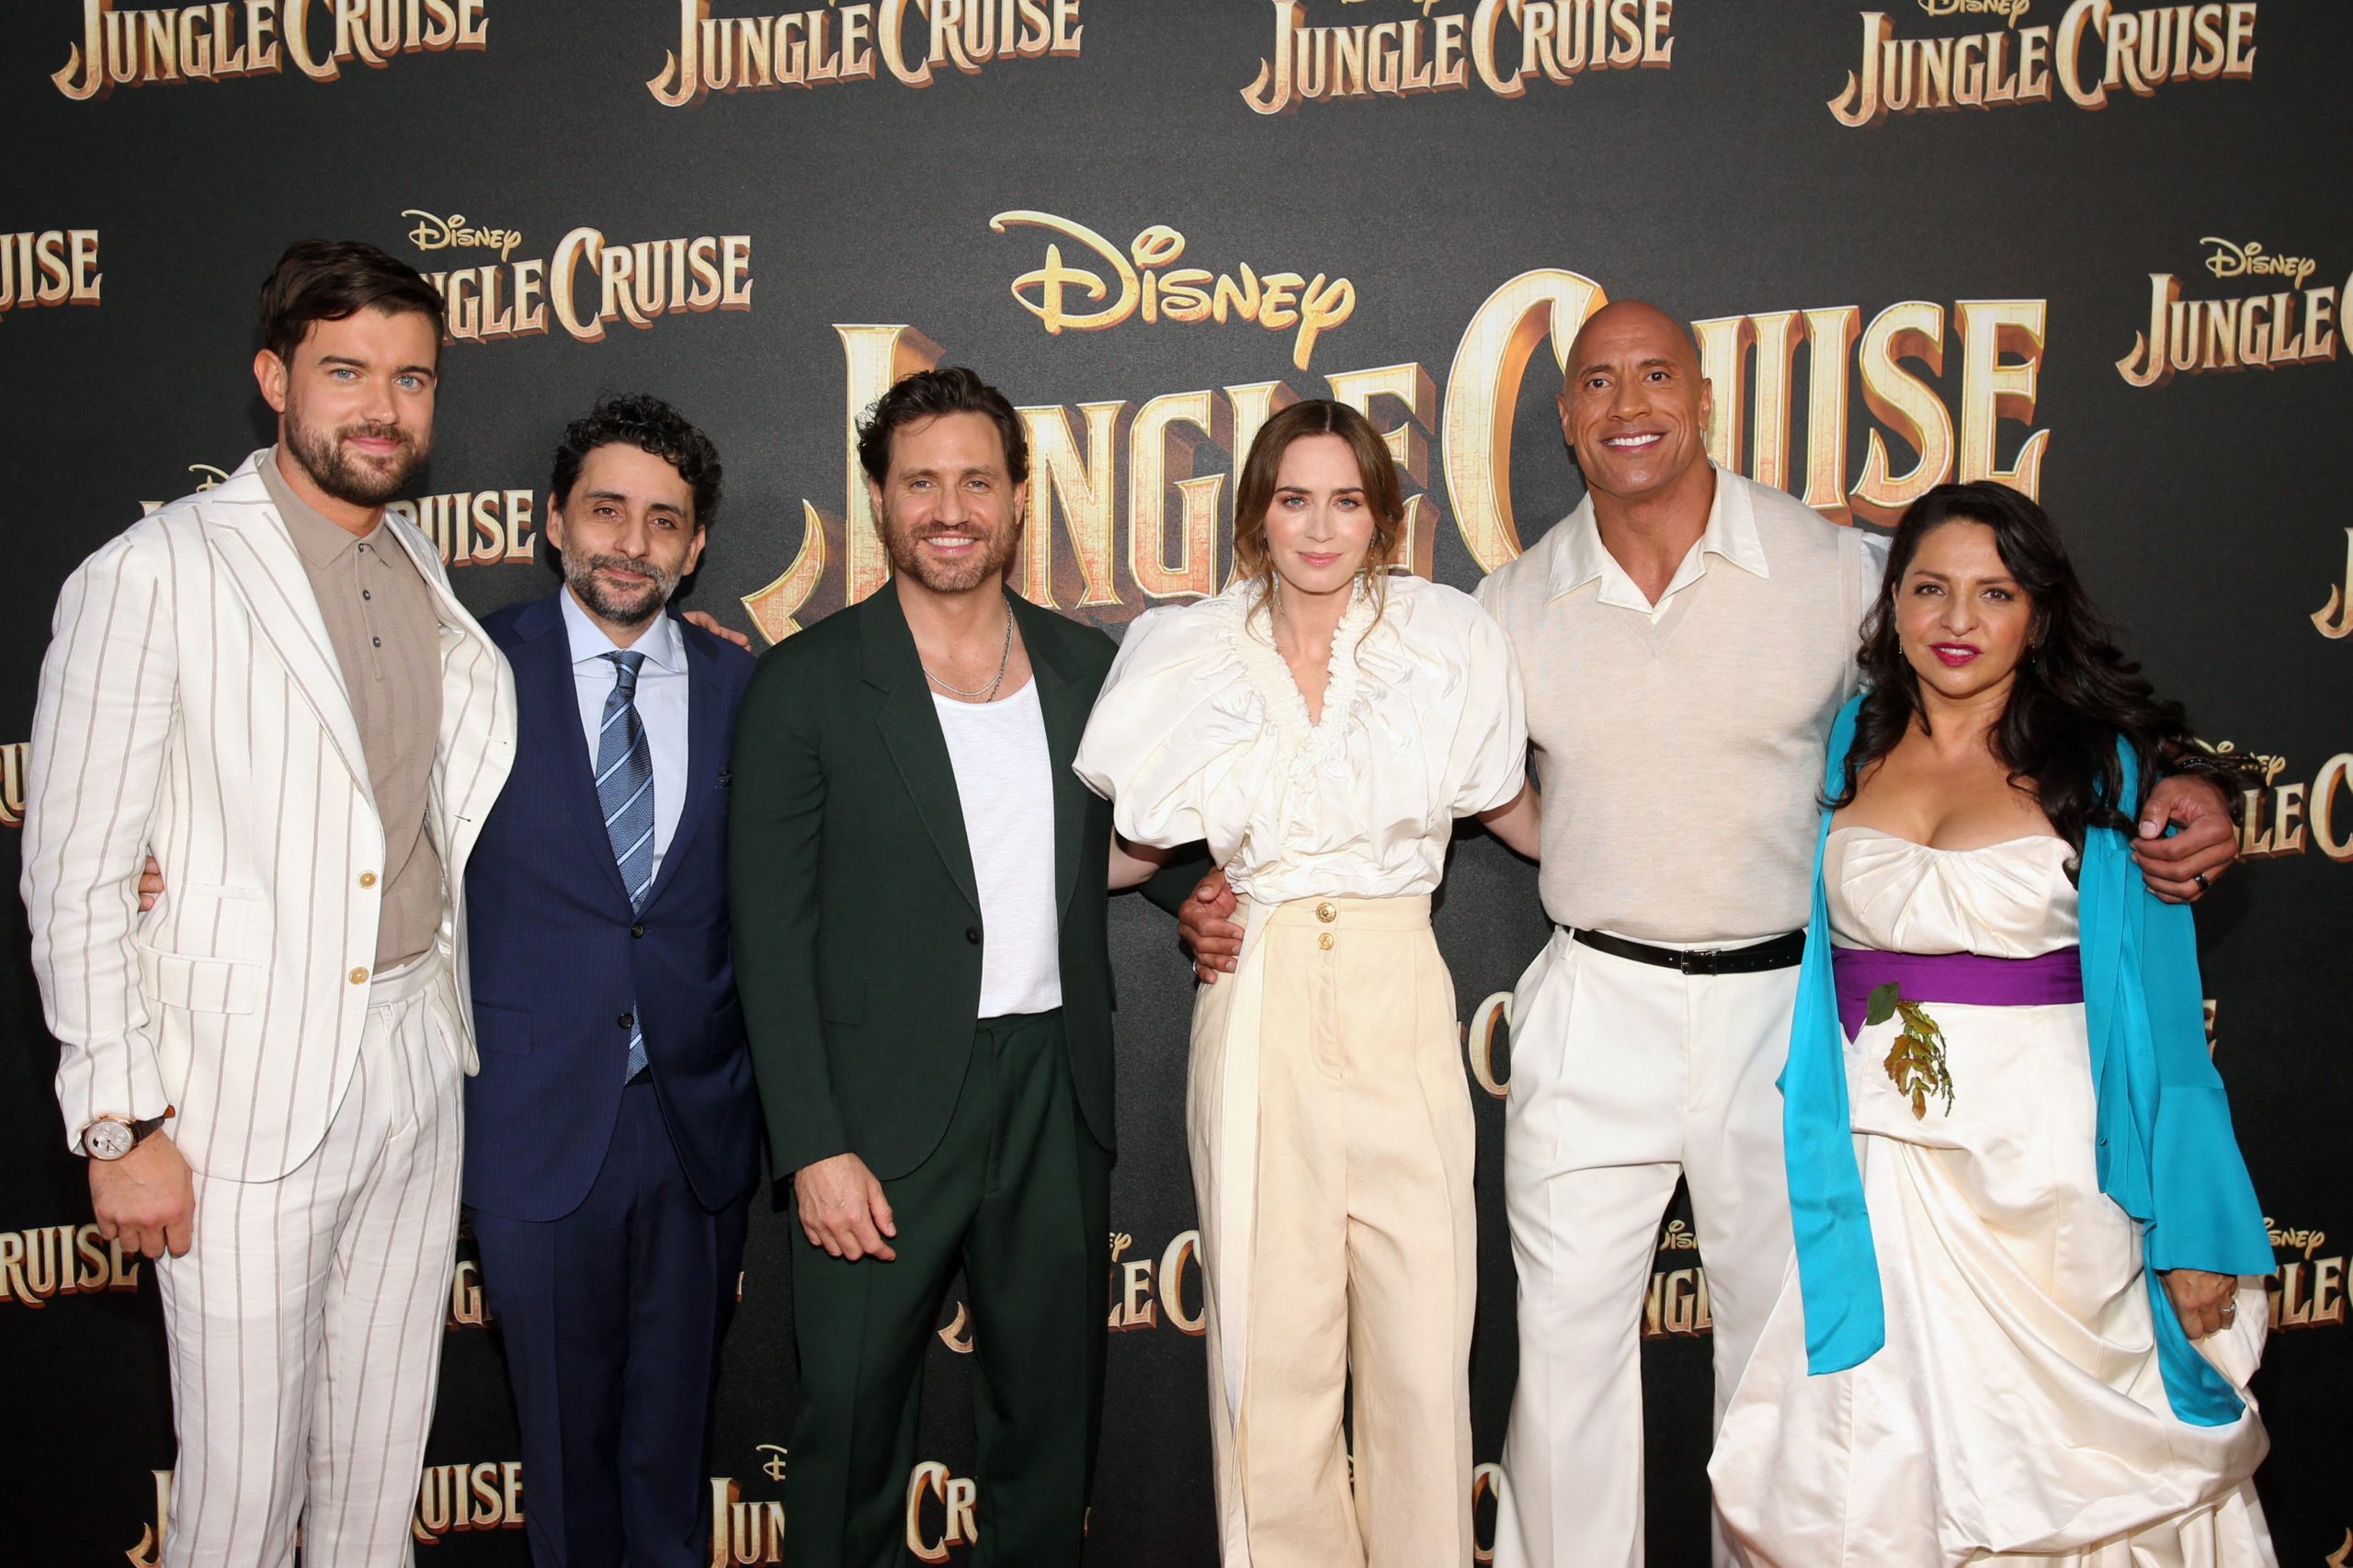 Jack Whitehall, Jaume Collet-Serra, Édgar Ramírez, Emily Blunt, Dwayne Johnson, and Veronica Falcón arrive at the world premiere for JUNGLE CRUISE, held at Disneyland in Anaheim, California on July 24, 2021.   